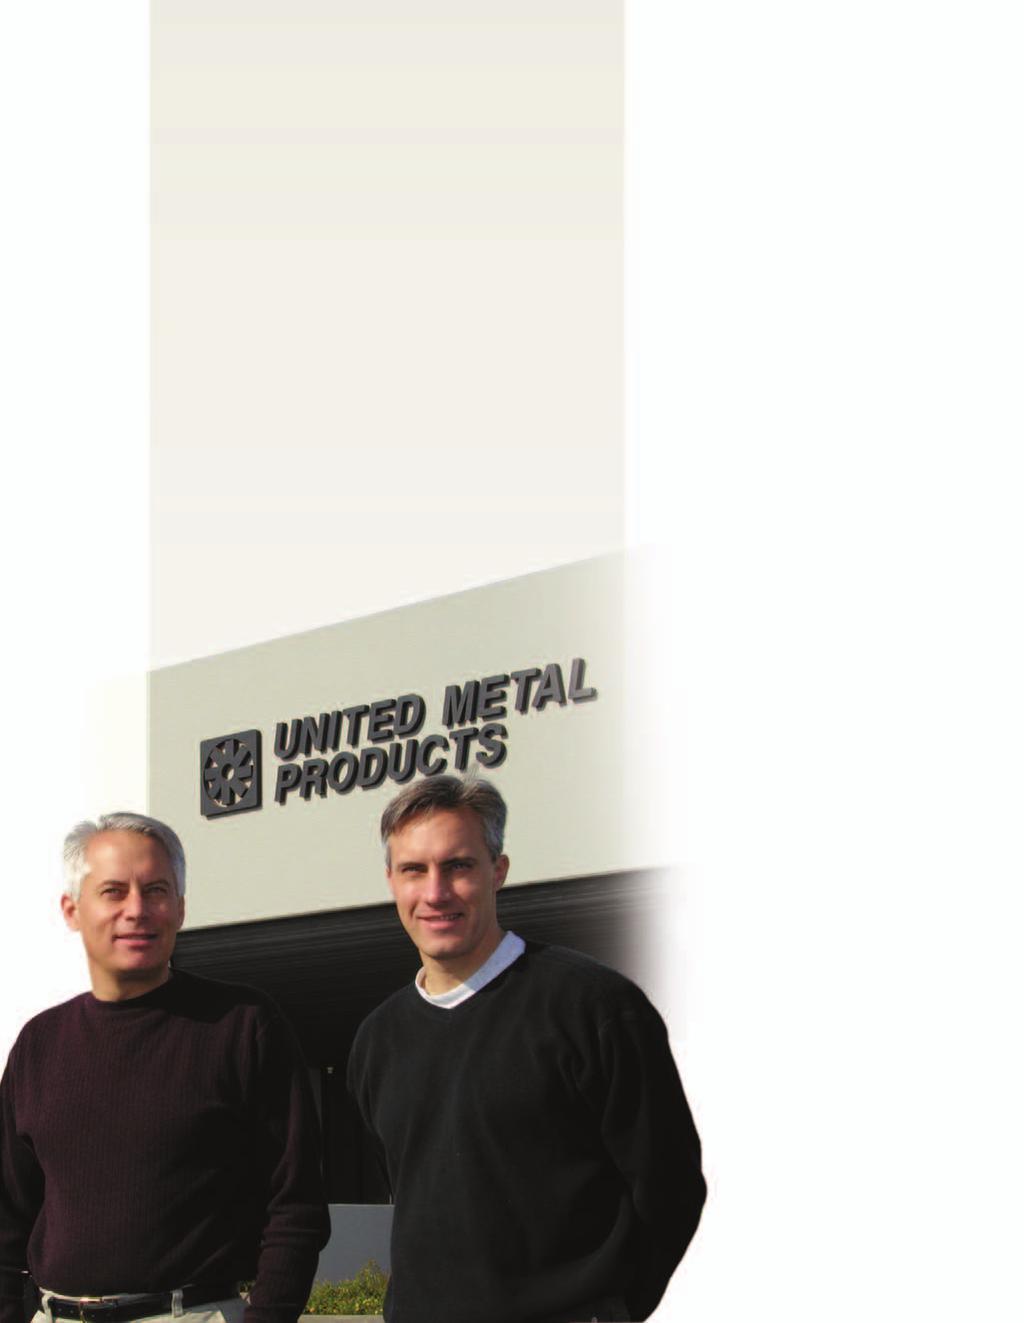 United Metal Products Commitment: To deal fairly and honestly in all situations and business relationships.